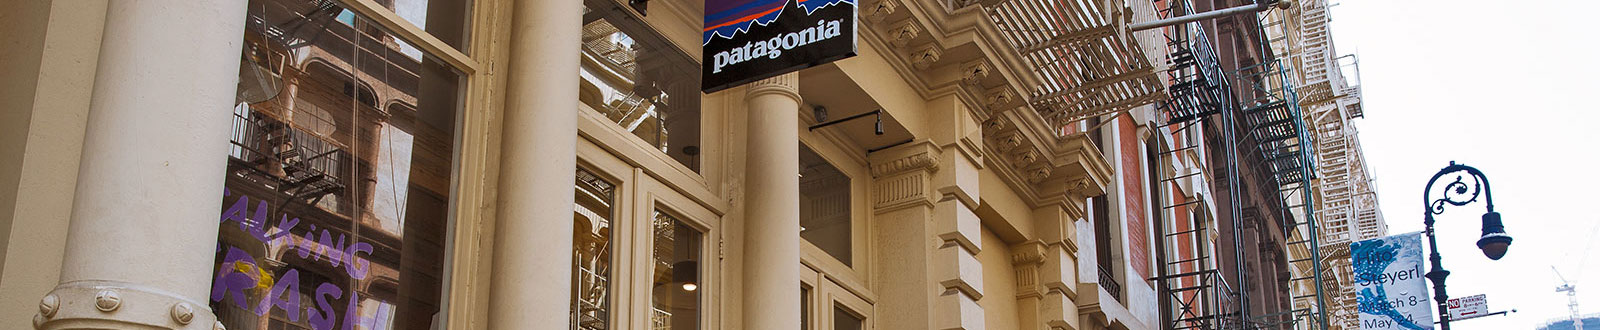 Patagonia SoHo Supported Grantees - Patagonia Action Works